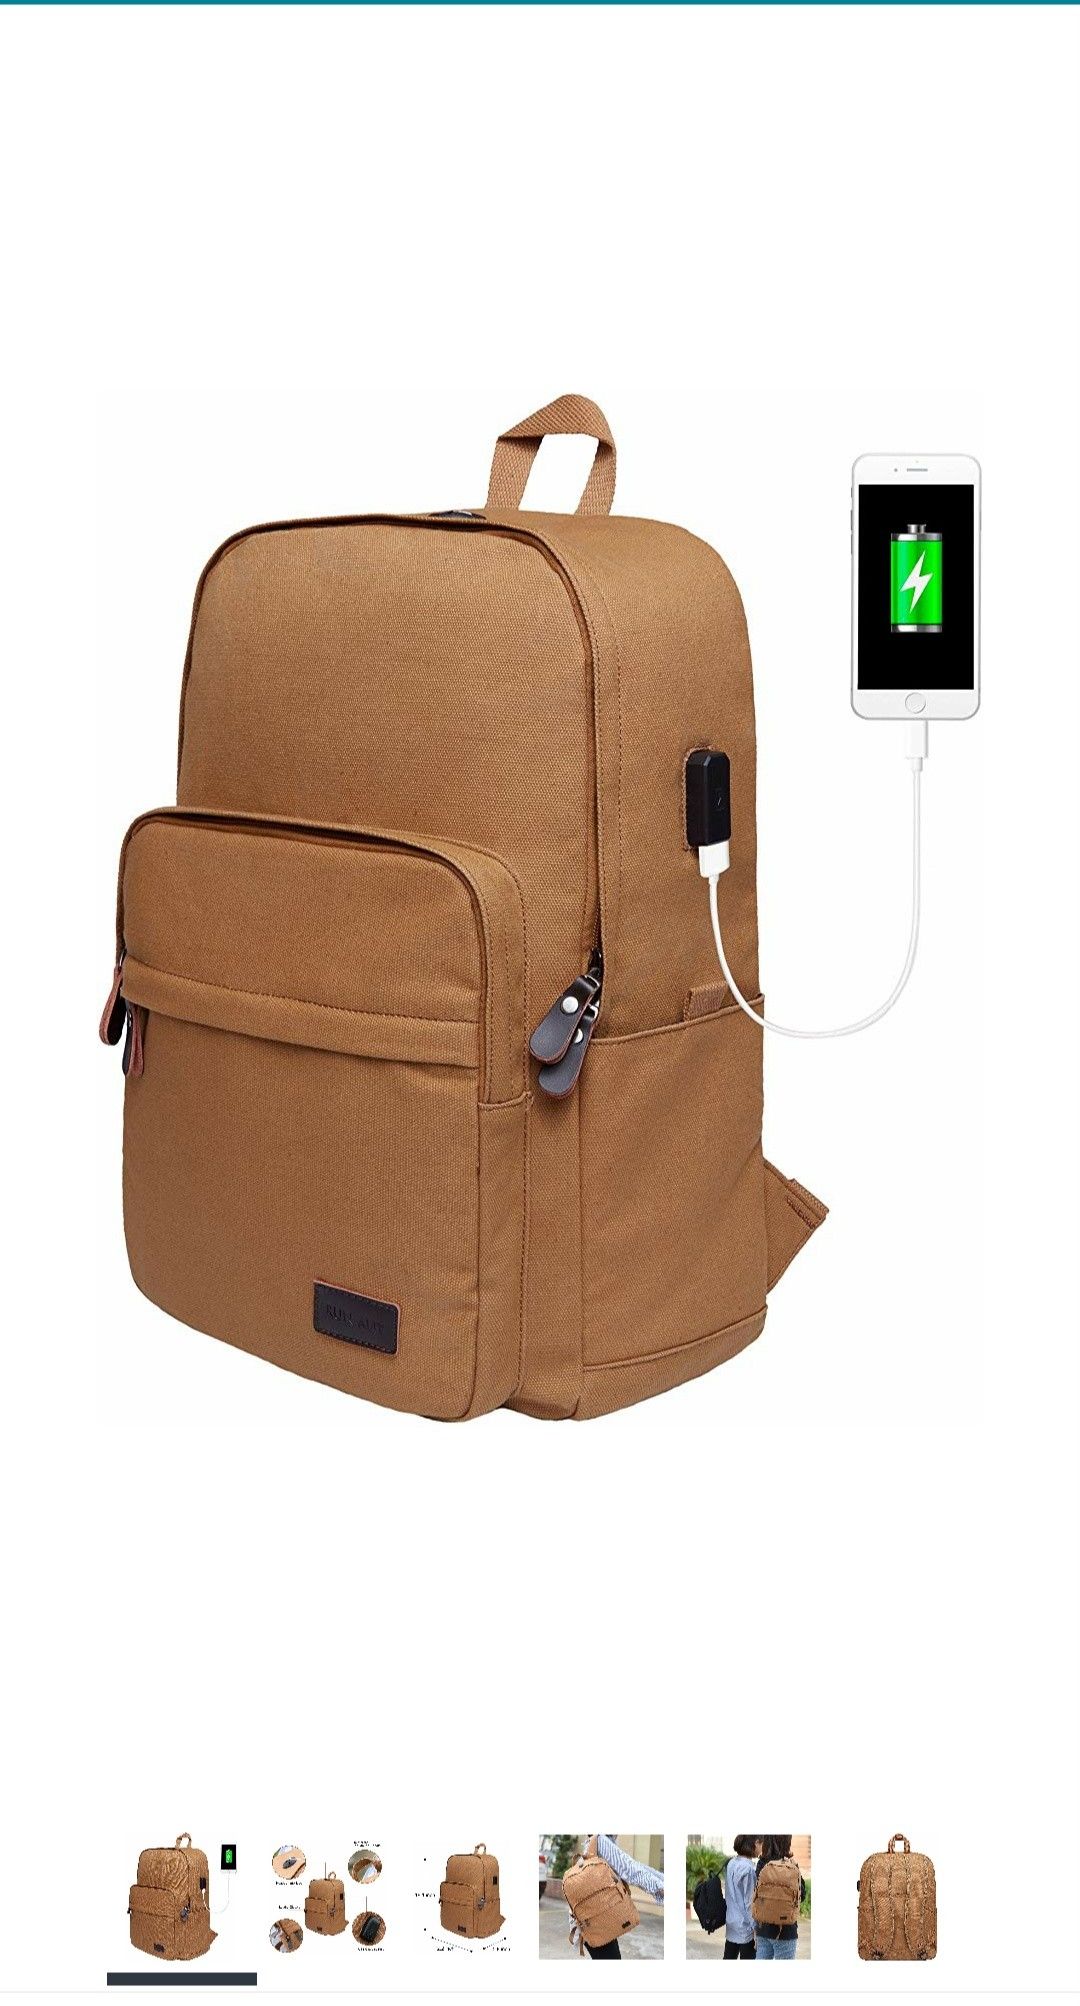 Backpack Canvas Student Bookbag for Men/Women, Boys/Girls with USB Charging Port Fits 15.6 Inch Laptop and Notebook - Brown